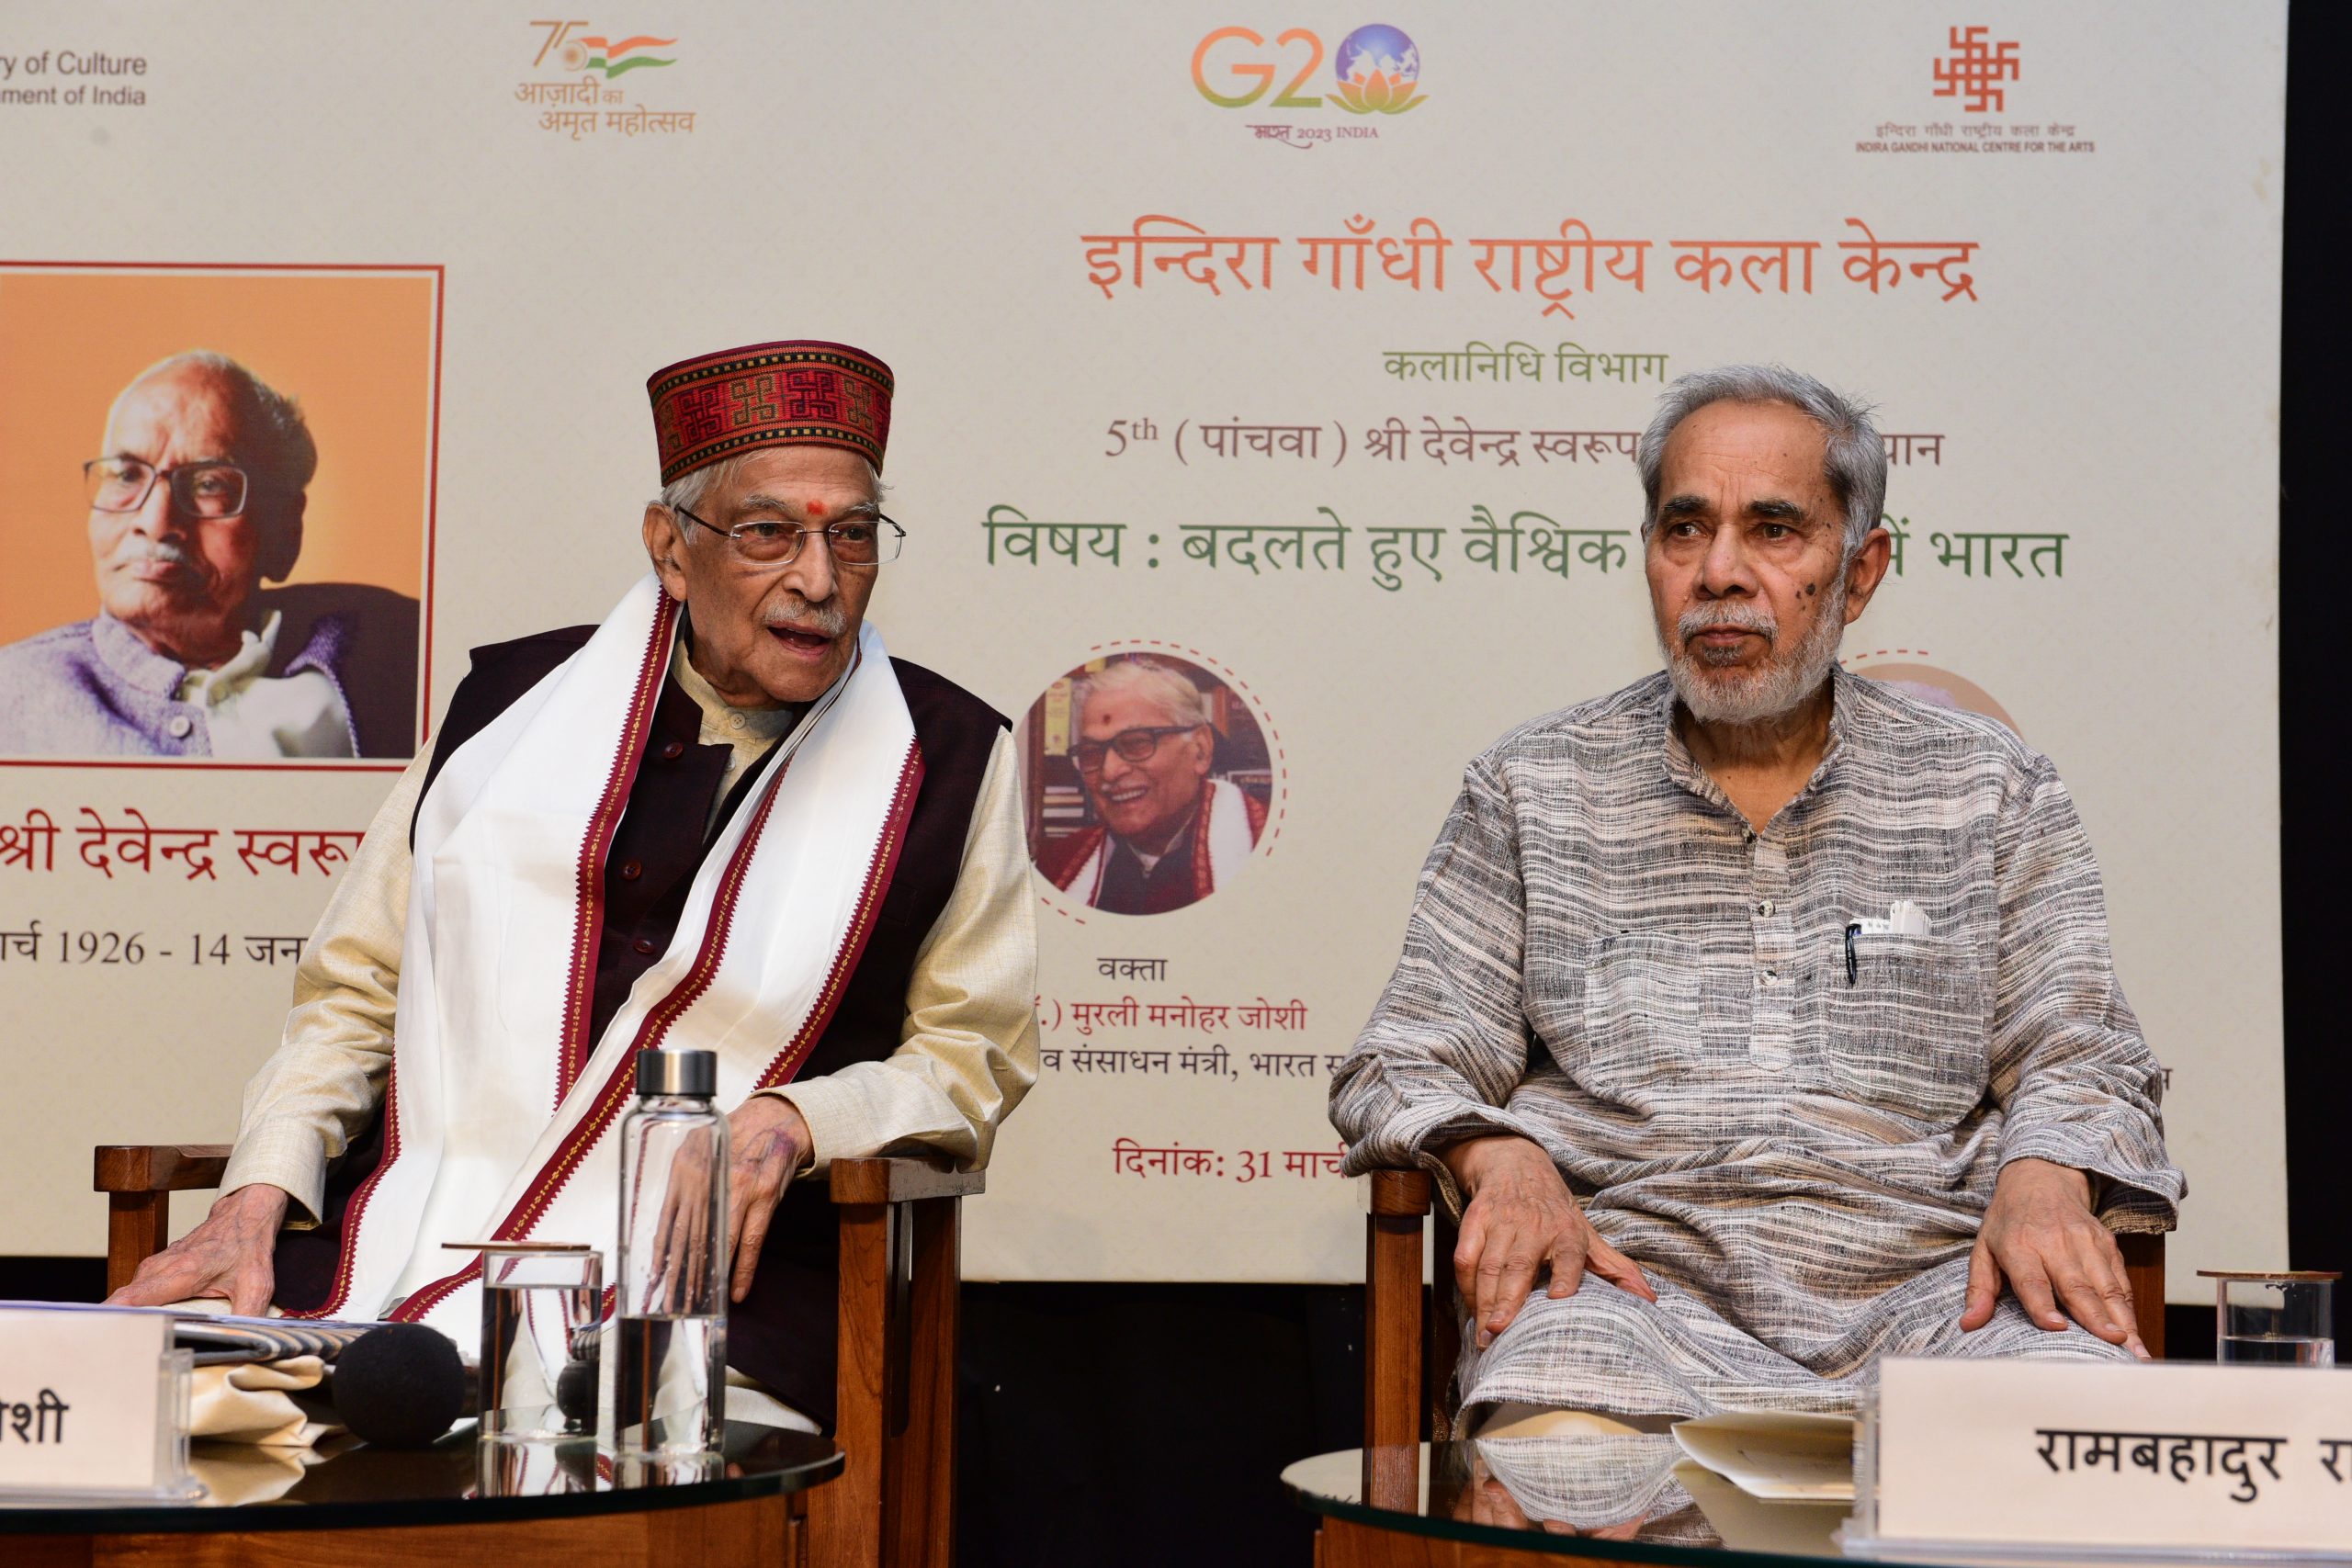 "India is in a position to lead the world in peaceful, conscious and stable living": Dr. Murli Manohar Joshi